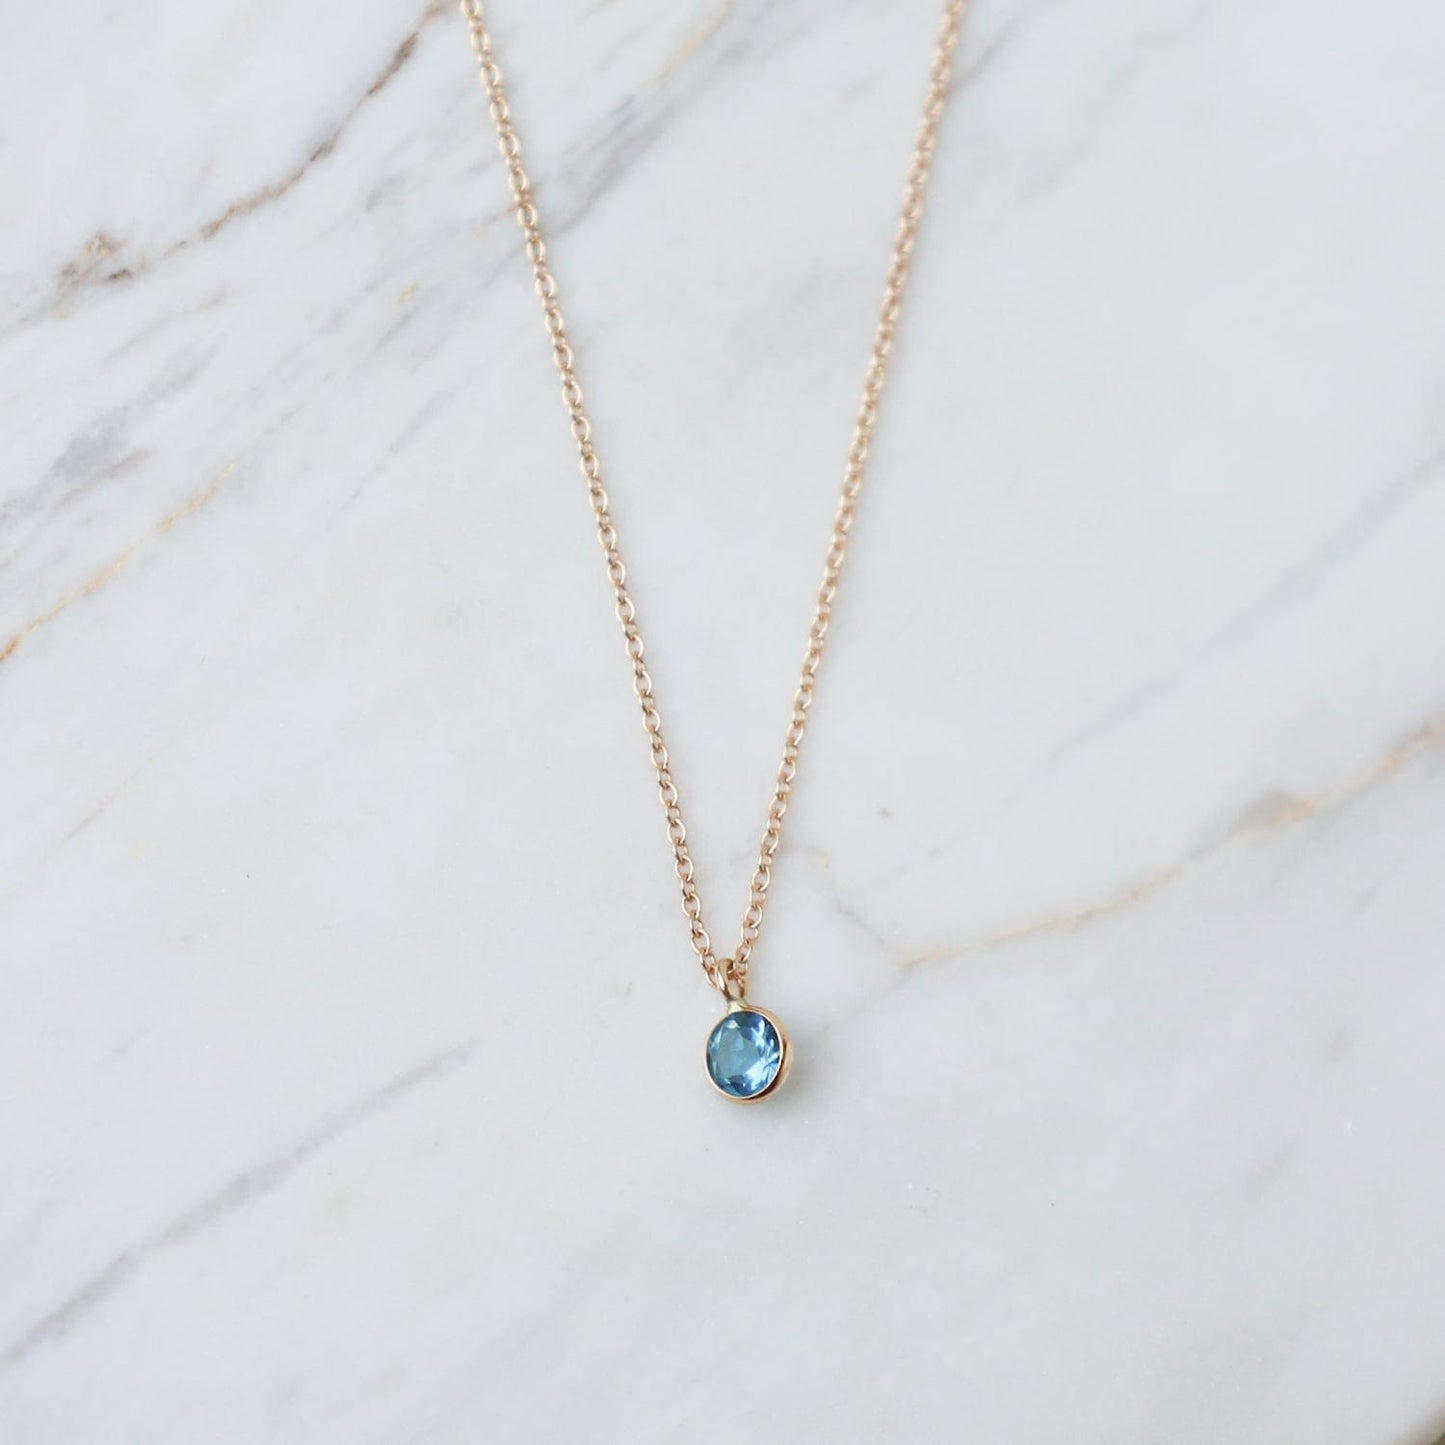 NKL-14K Yellow Gold & Dark Blue Topaz Solitaire Necklace